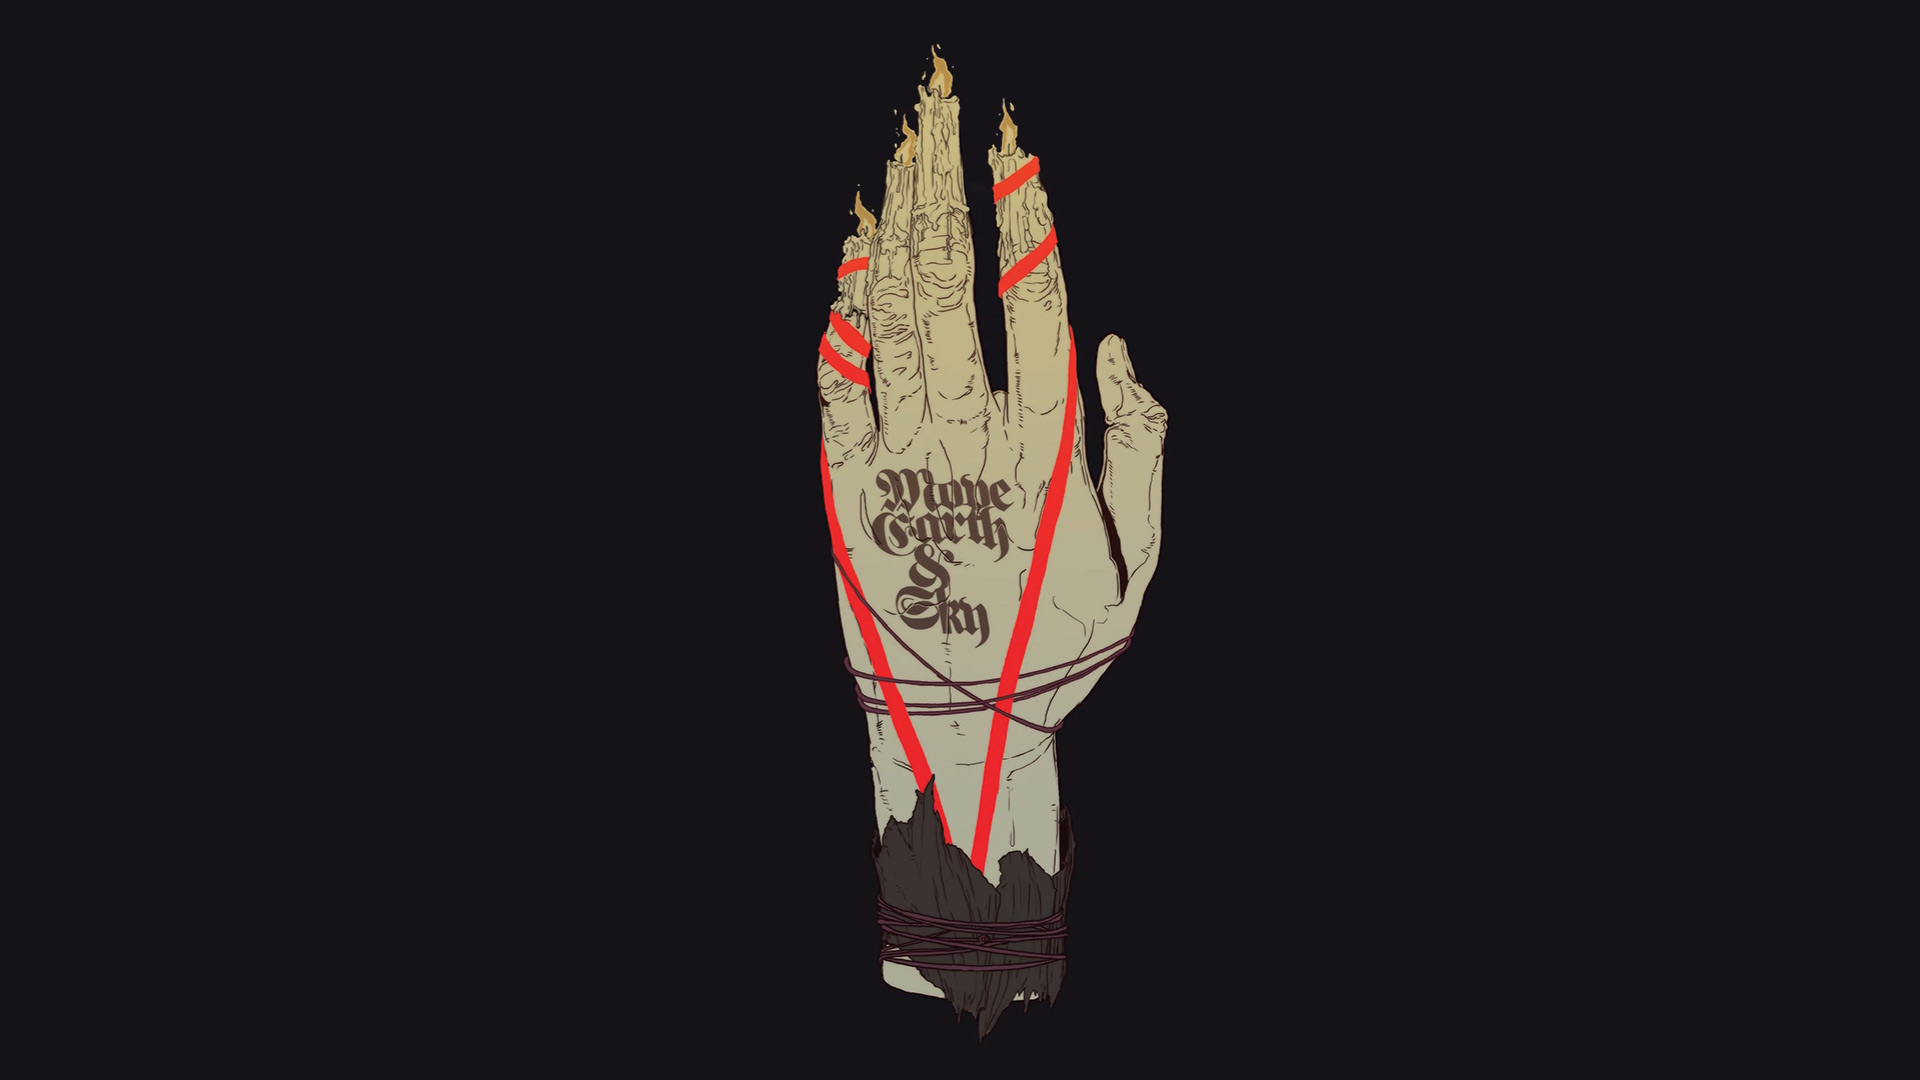 General 1920x1080 Queens of the Stone Age hands simple background candles hard rock